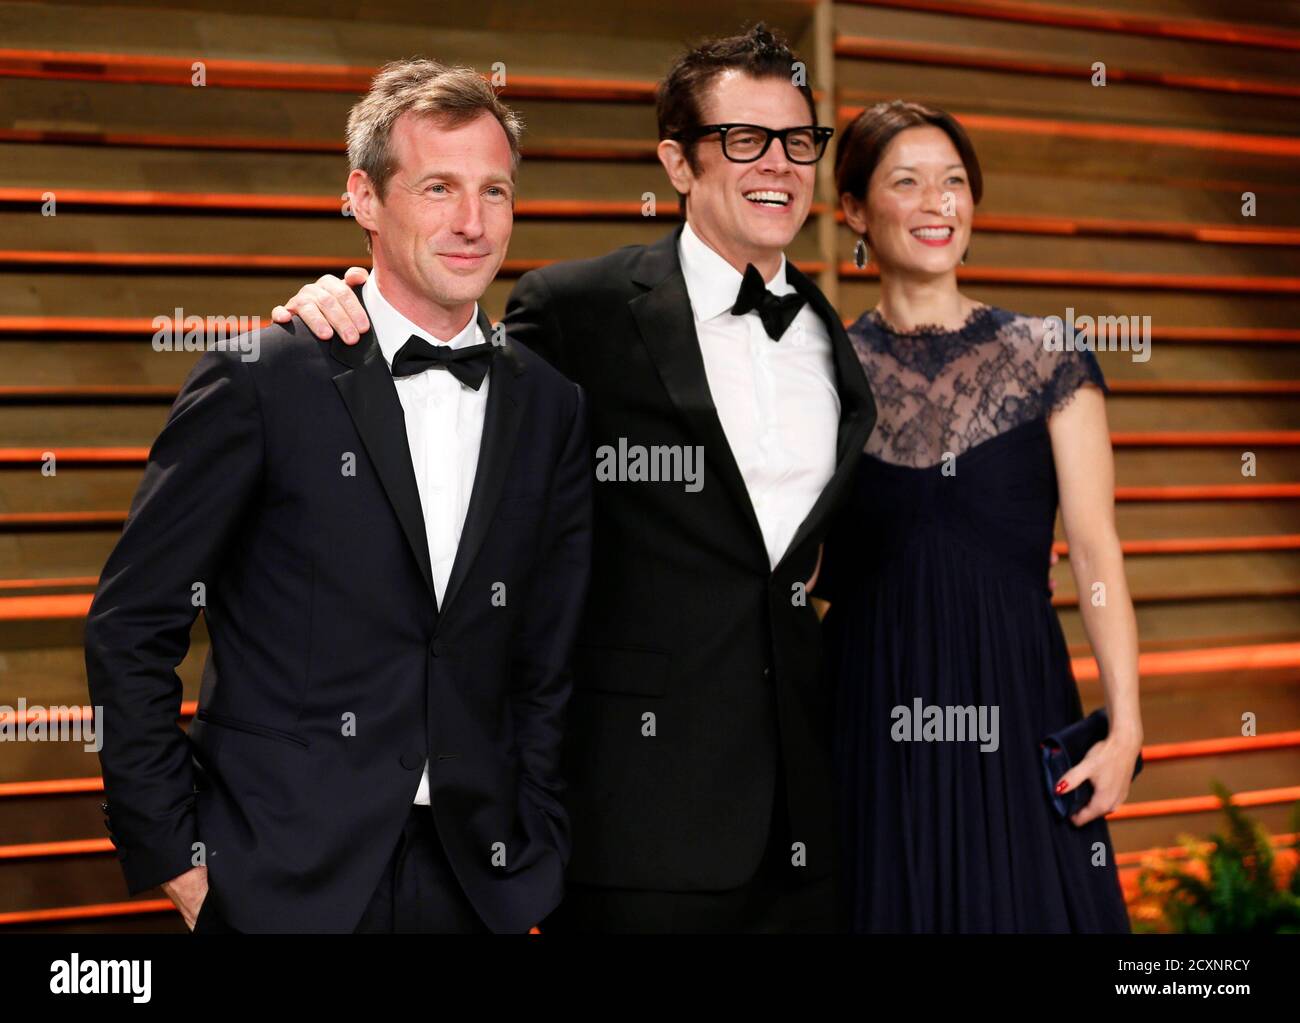 Johnny Knoxville And Naomi Nelson Banque d'image et photos - Alamy